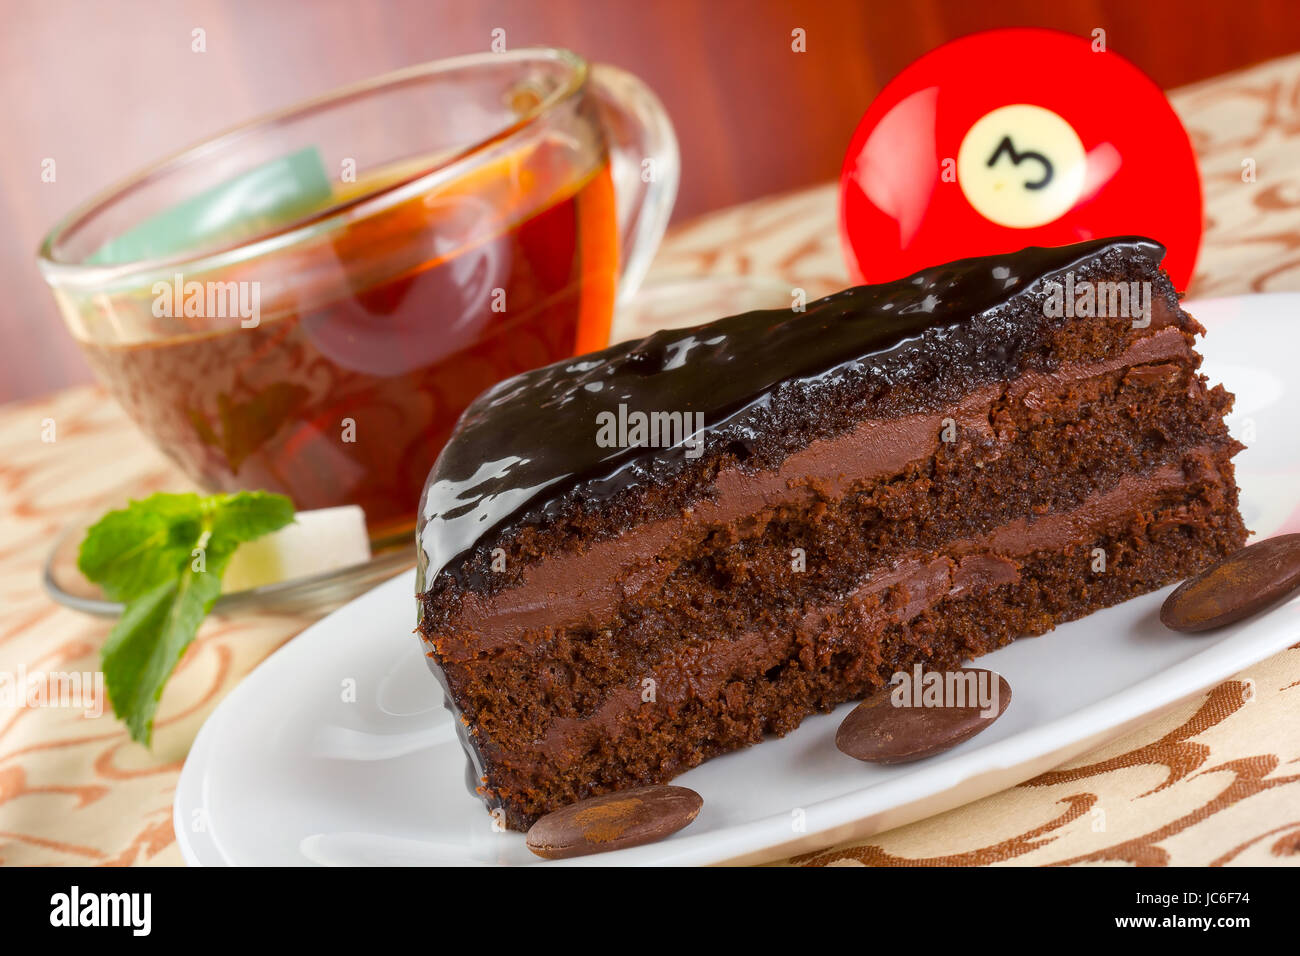 Portion of chocolate cake and cup of tea with fresh mint, served on a white plate Stock Photo